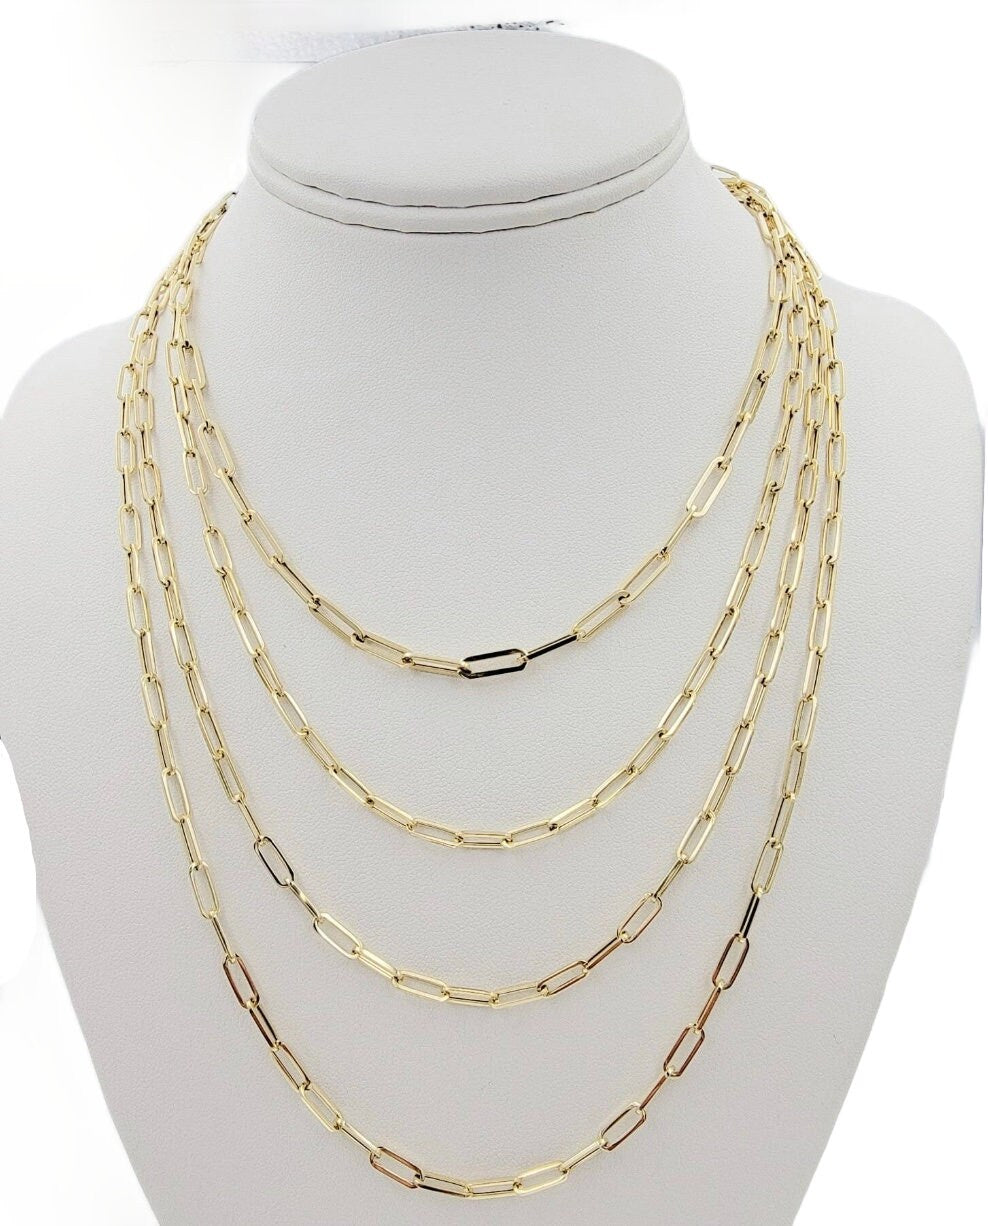 Ladys 14k Paperclip Chain Necklace, 16 Inch Solid Yellow Gold Gift for Her